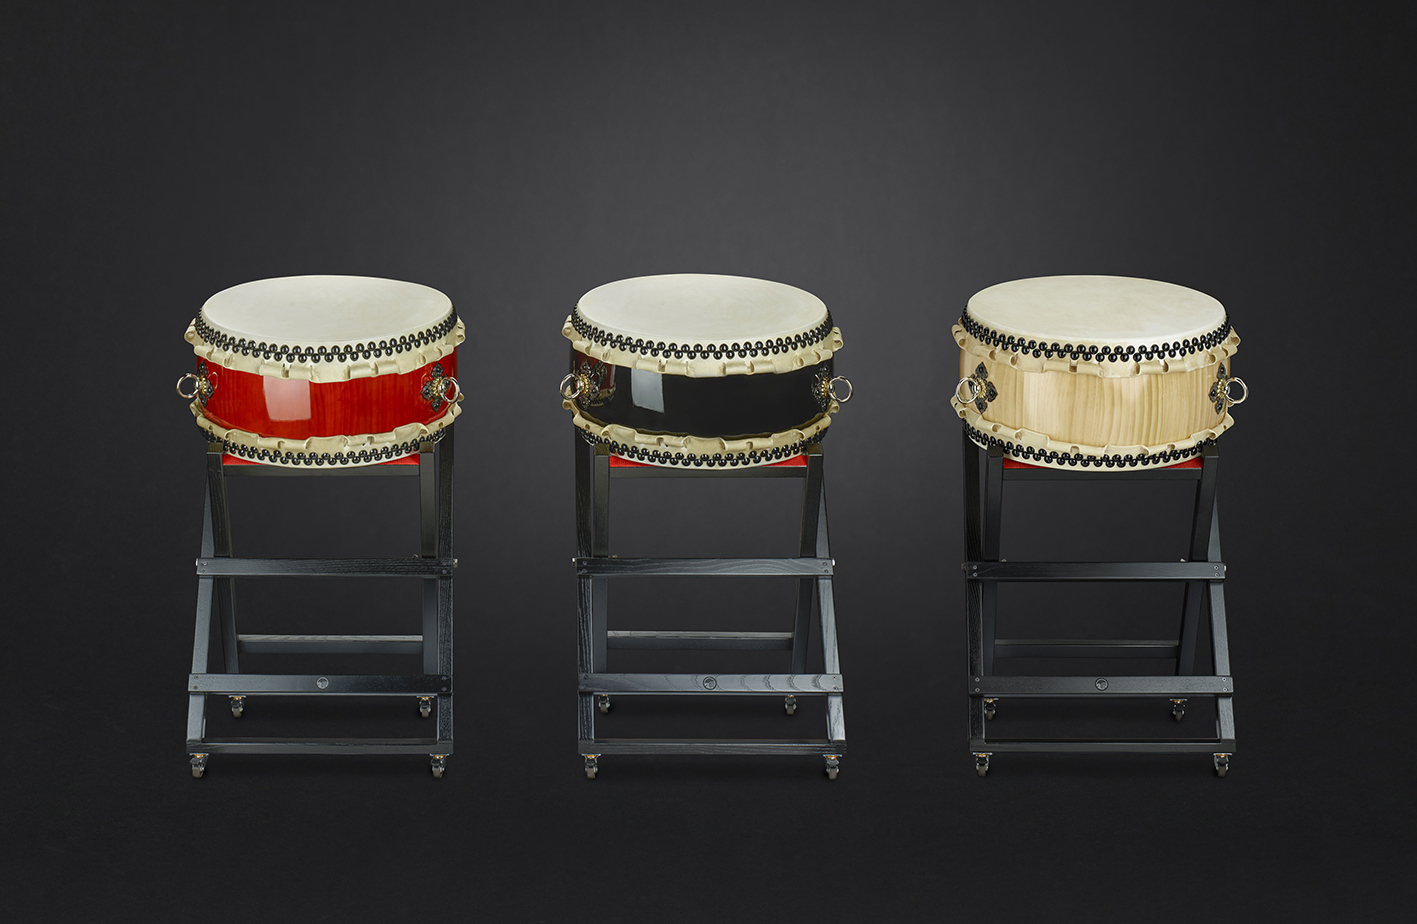 Hira-Daiko drums hq. Ø48cm/h:25cm  (red-brown, shiny-black & nature)  with X-stand high  (695€/195€)